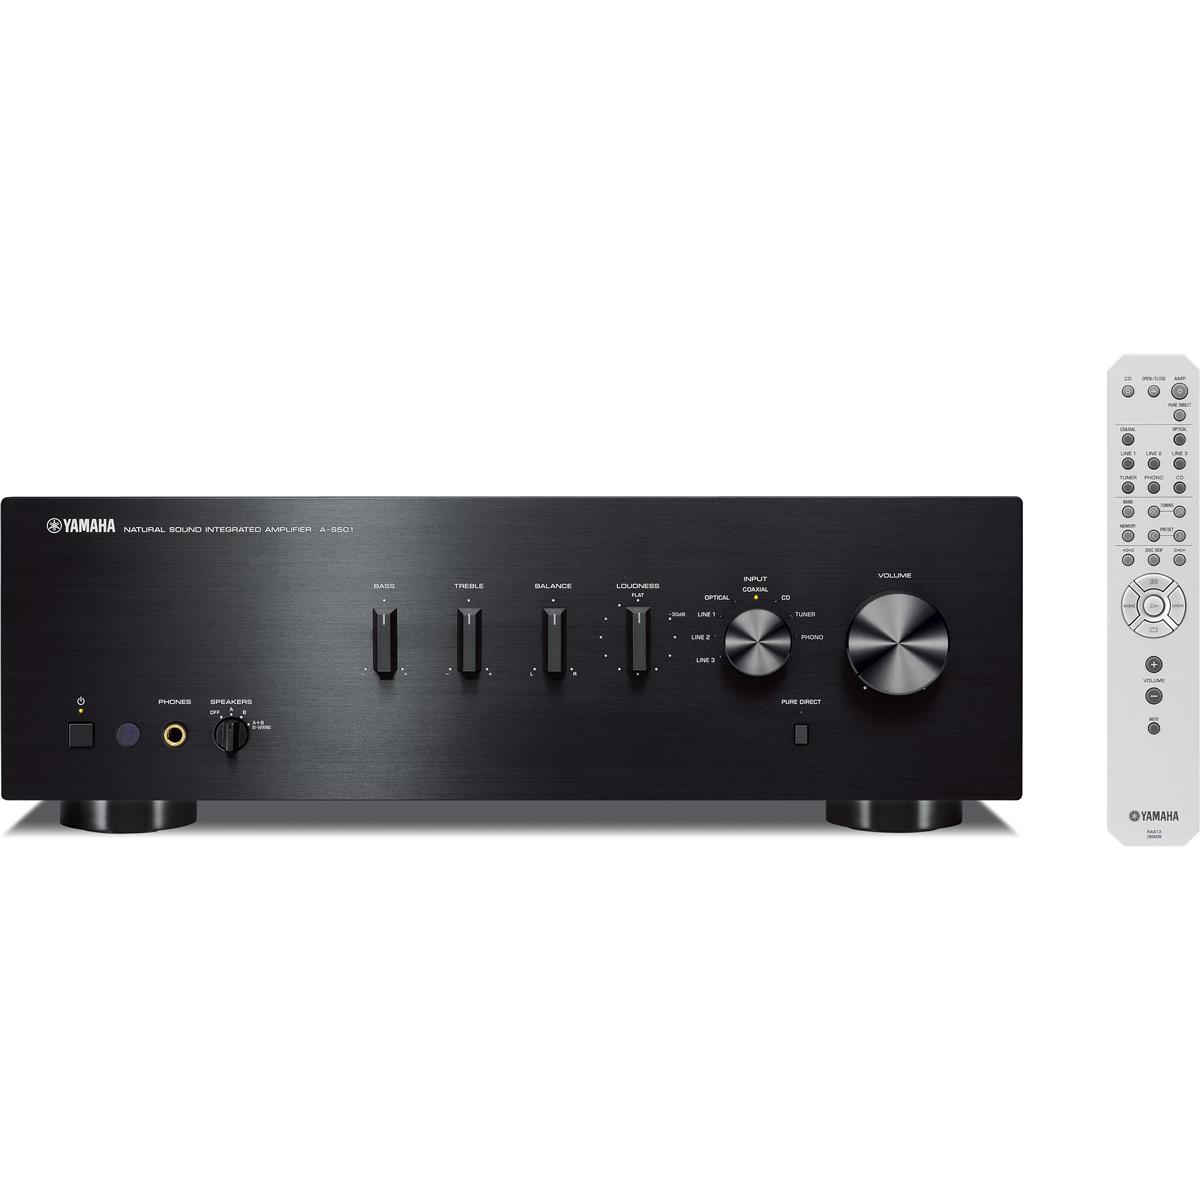 Yamaha A-S501 Integrated Amplifier, Black -  A-S501BL